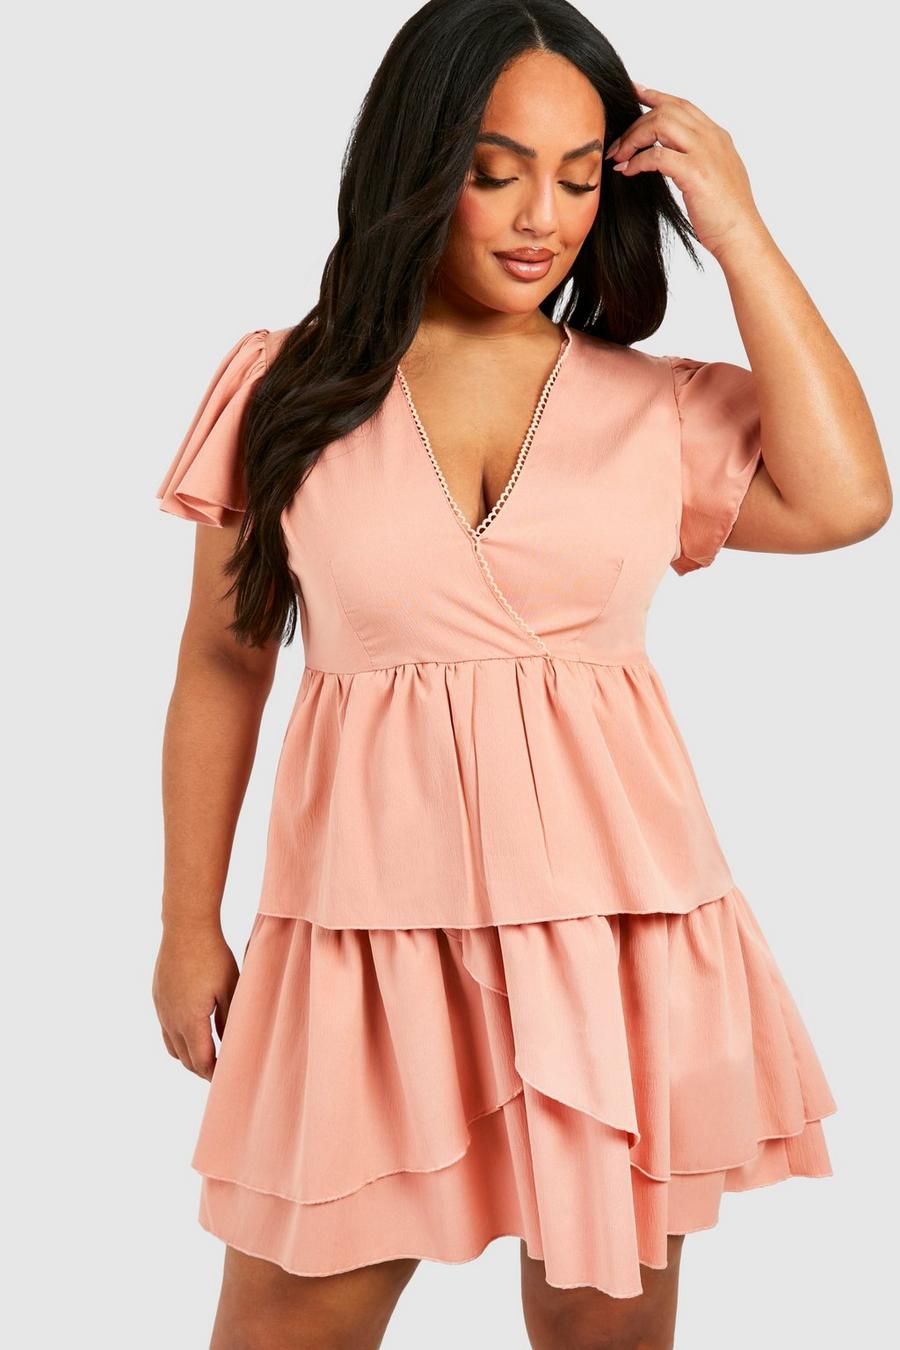 Grande taille - Robe patineuse à volants, Coral